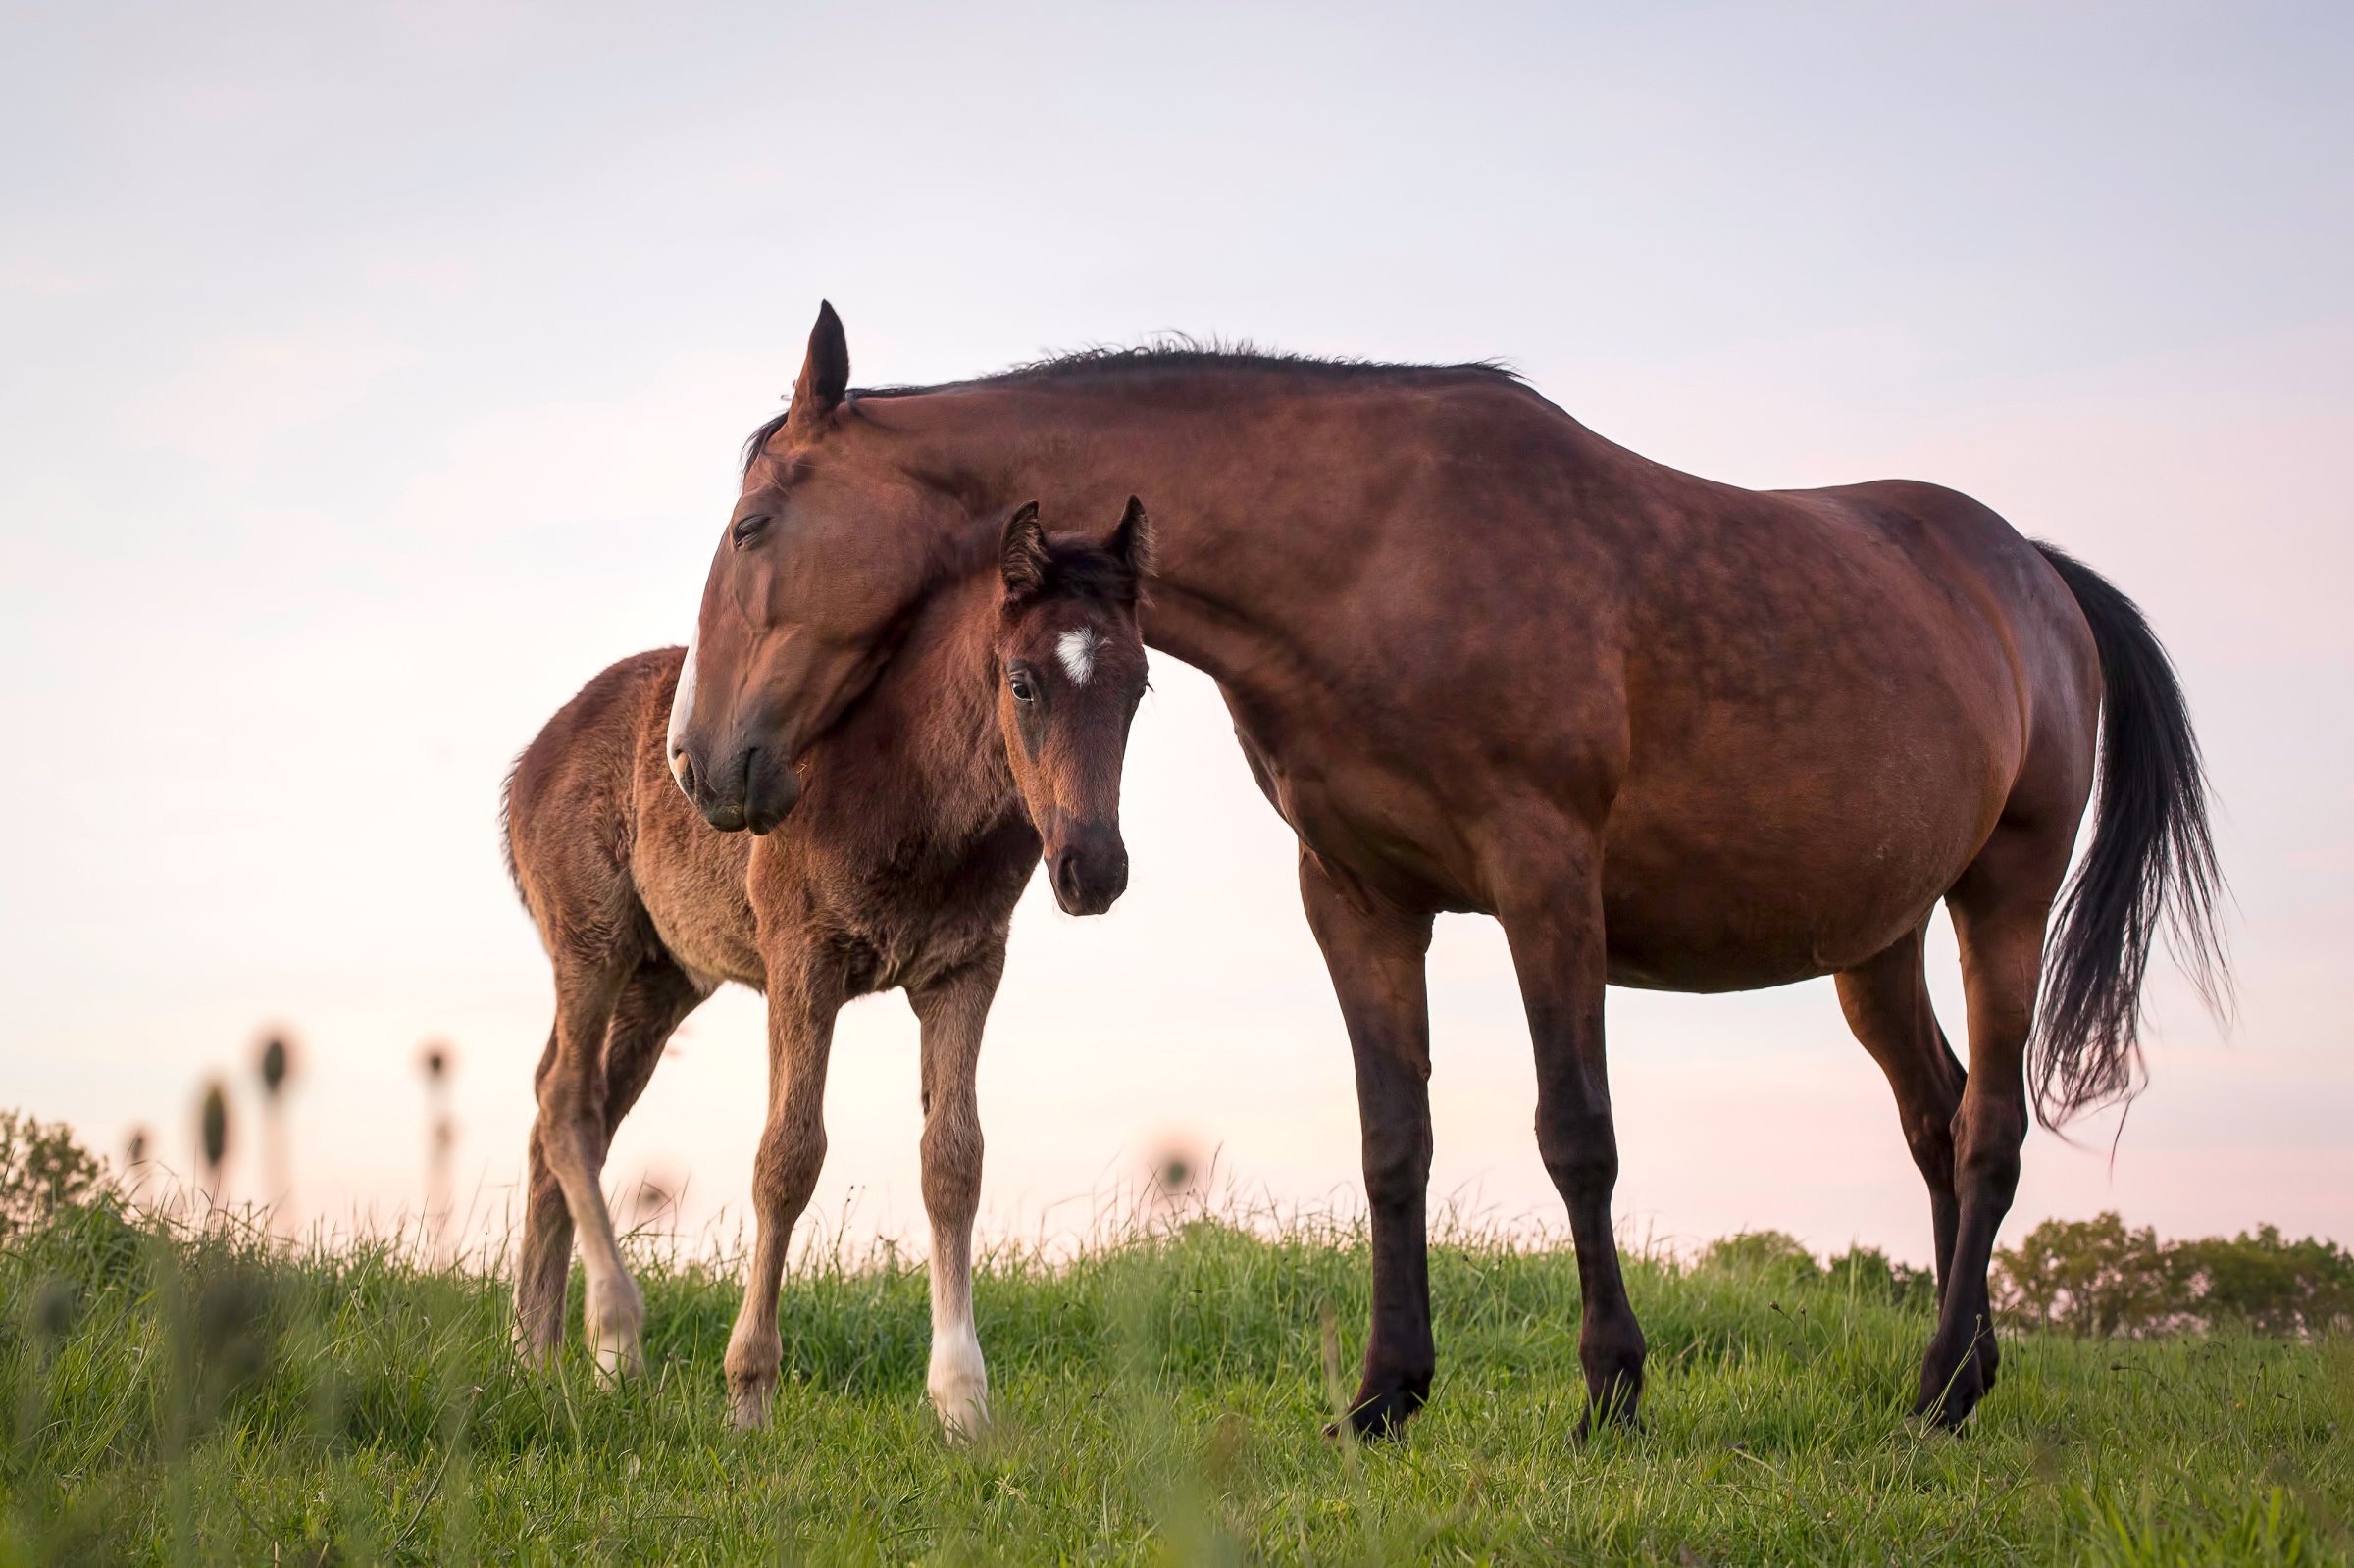 You can get $1,000 if you adopt a wild horse